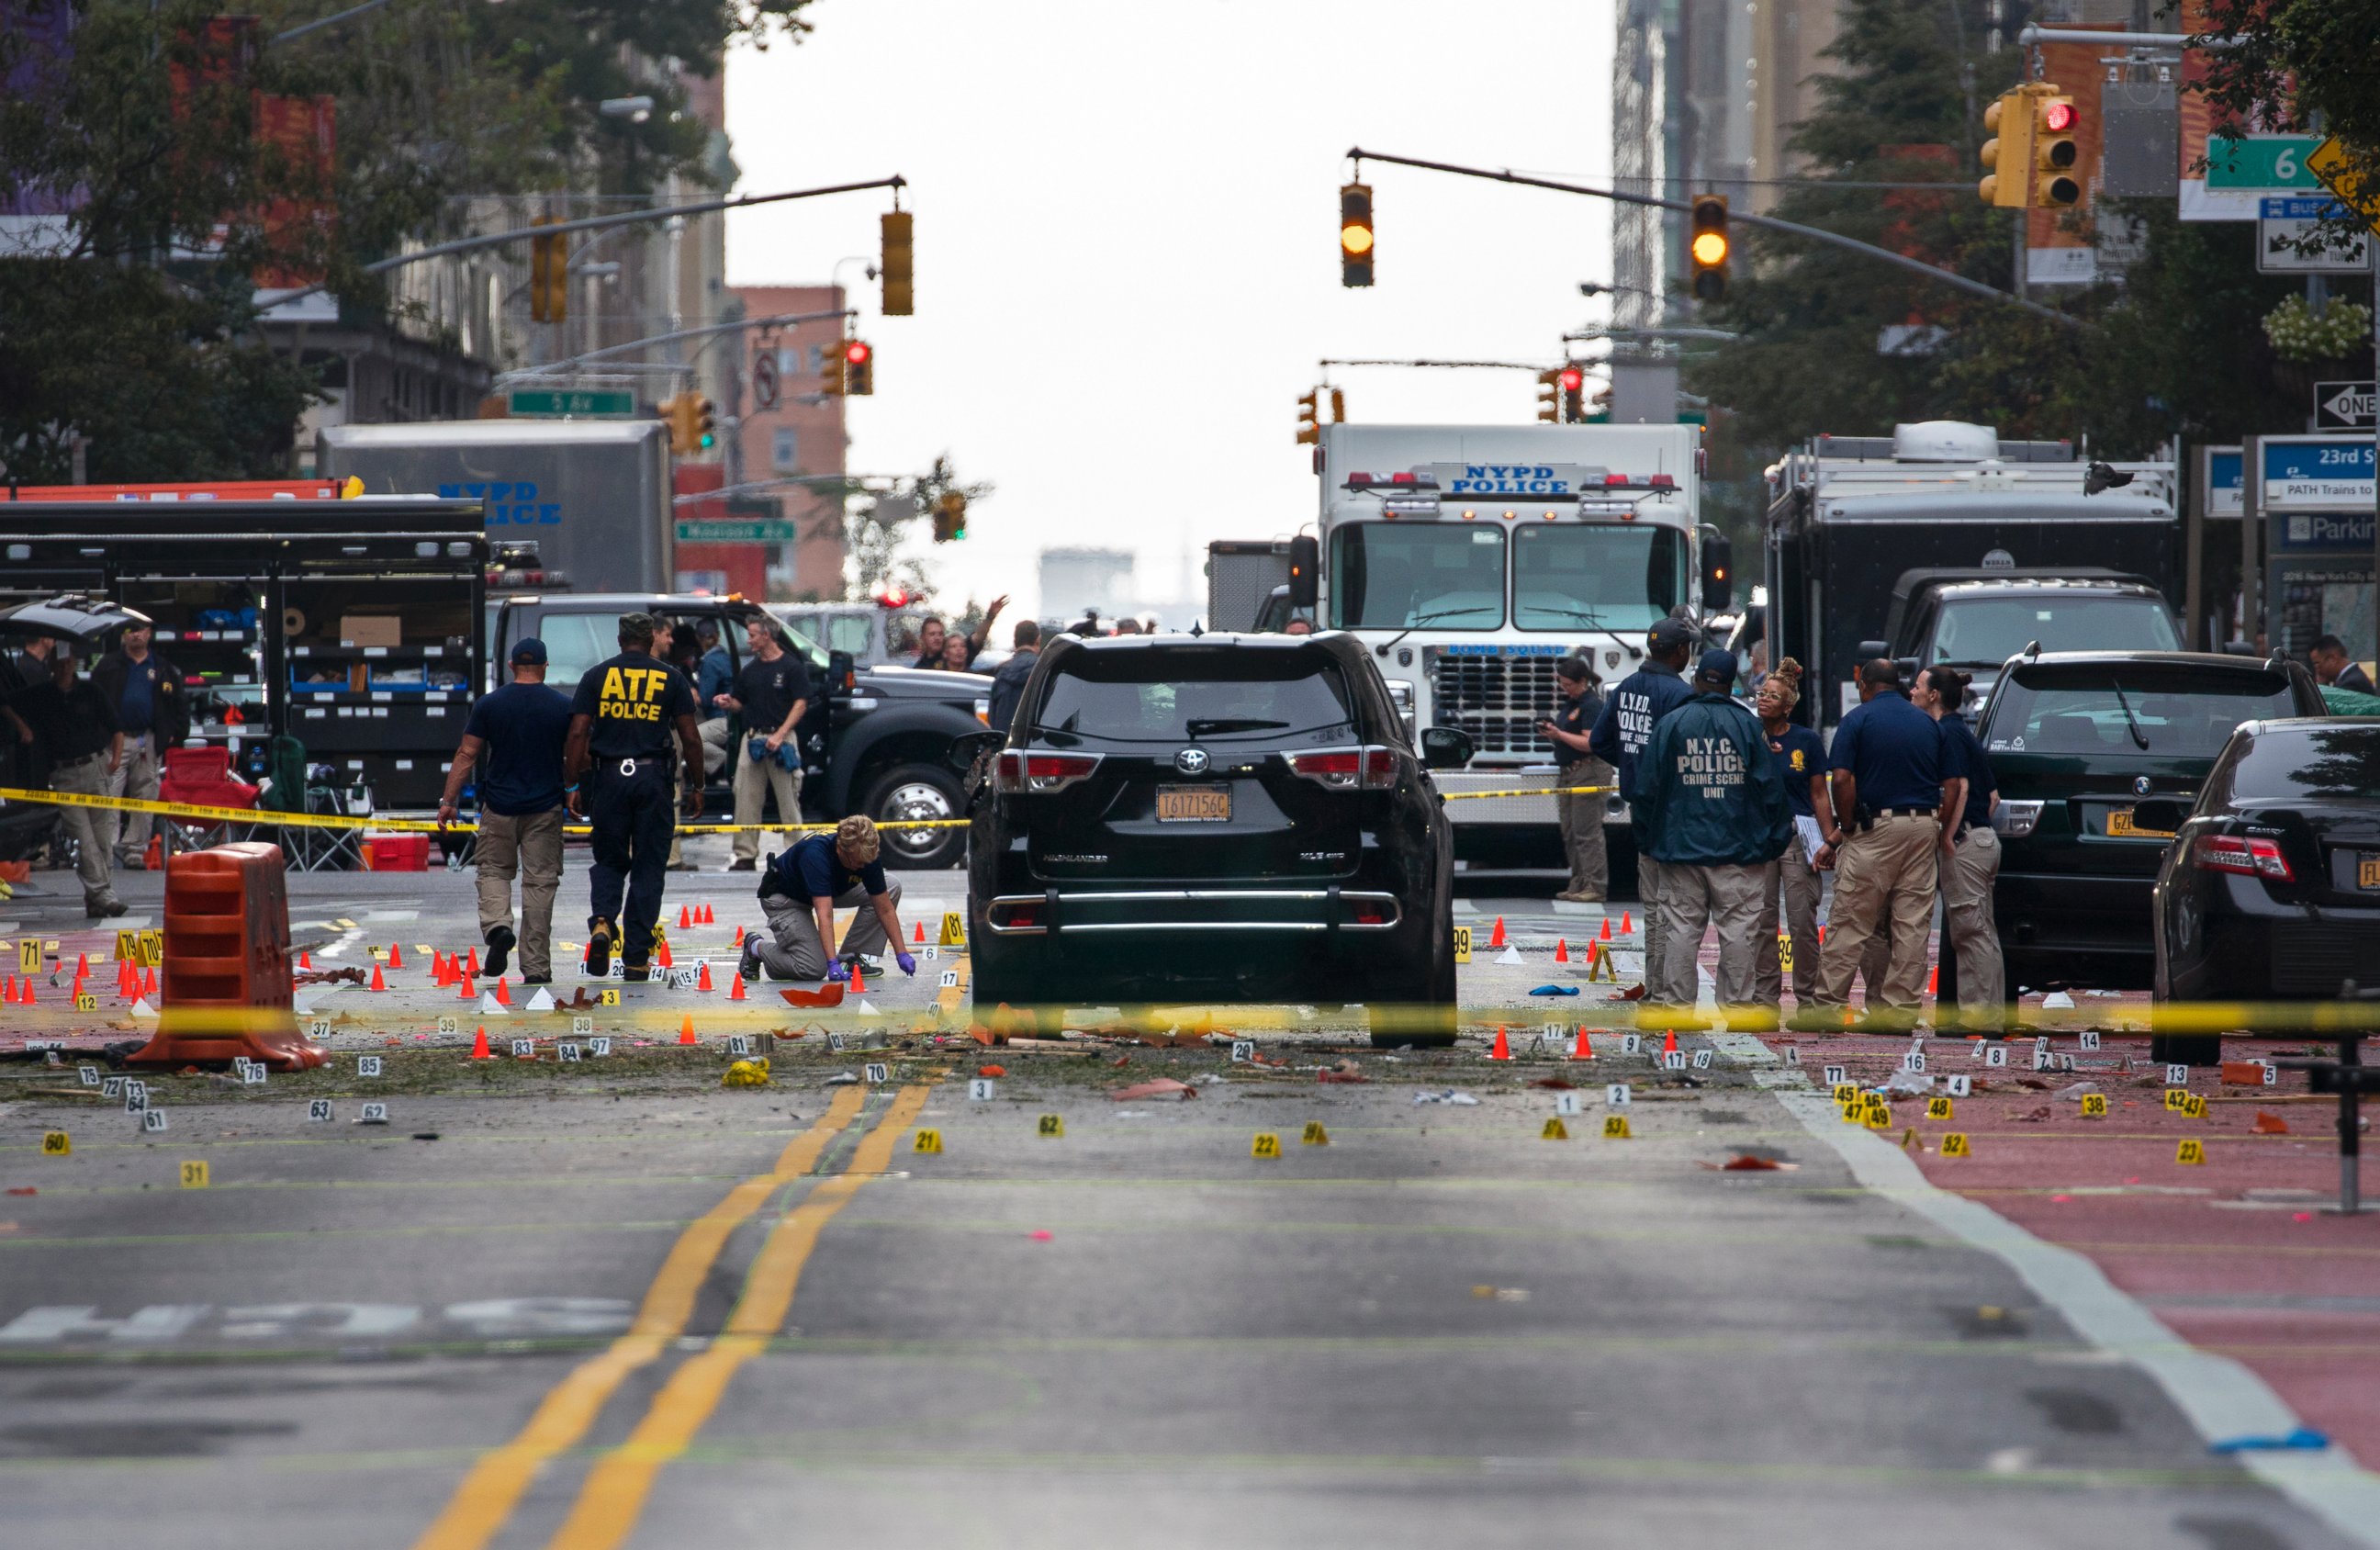 PHOTO: Crime scene investigators work at the scene of an explosion on West 23rd street in Manhattan's Chelsea neighborhood, in New York, Sept. 18, 2016, after an incident that injured passers-by Saturday night.